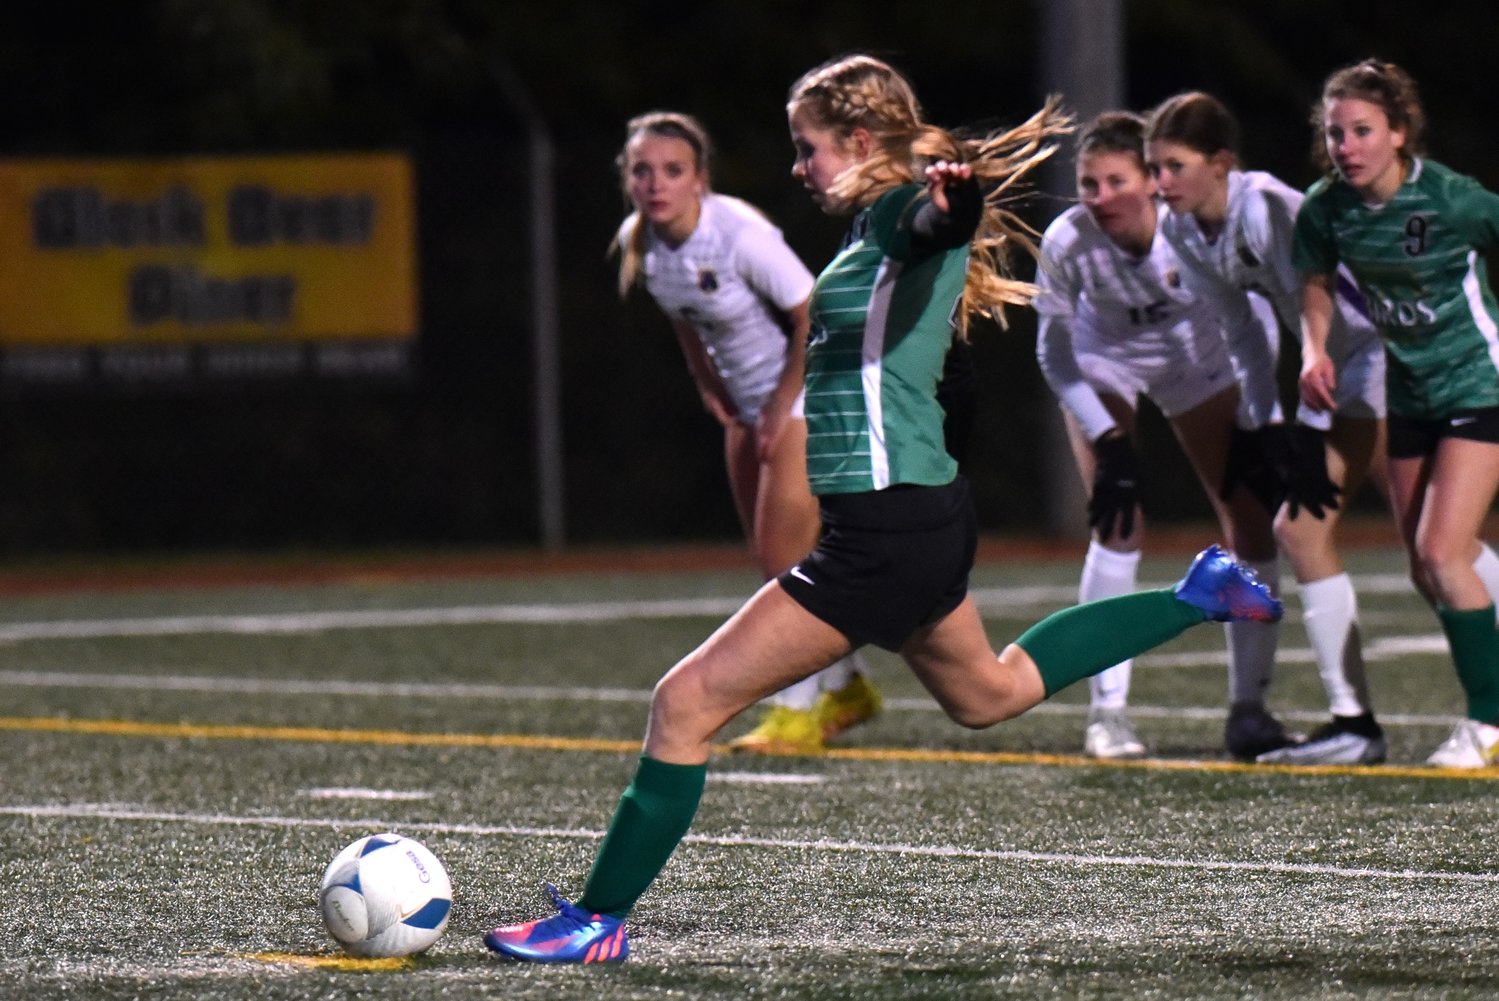 Kayla Pope takes a penalty kick to score Tumwater's lone goal in the T-Birds' 3-1 loss to Columbia River in the semifinals of the 2A state soccer tournament, Nov. 18, 2022 in Shoreline.